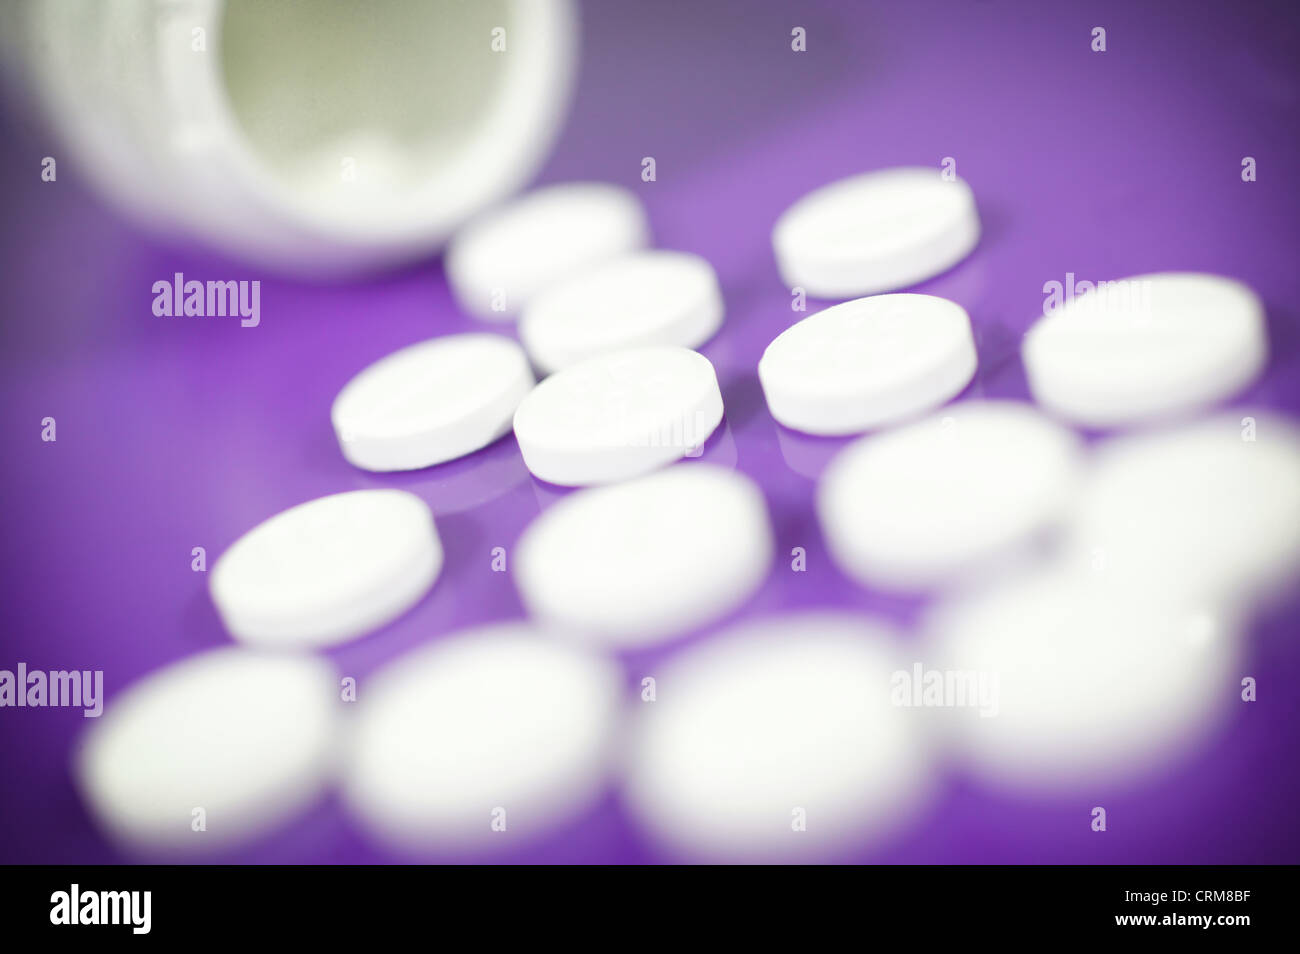 White paracetamol tablets spilling from a bottle against a purple background. Stock Photo